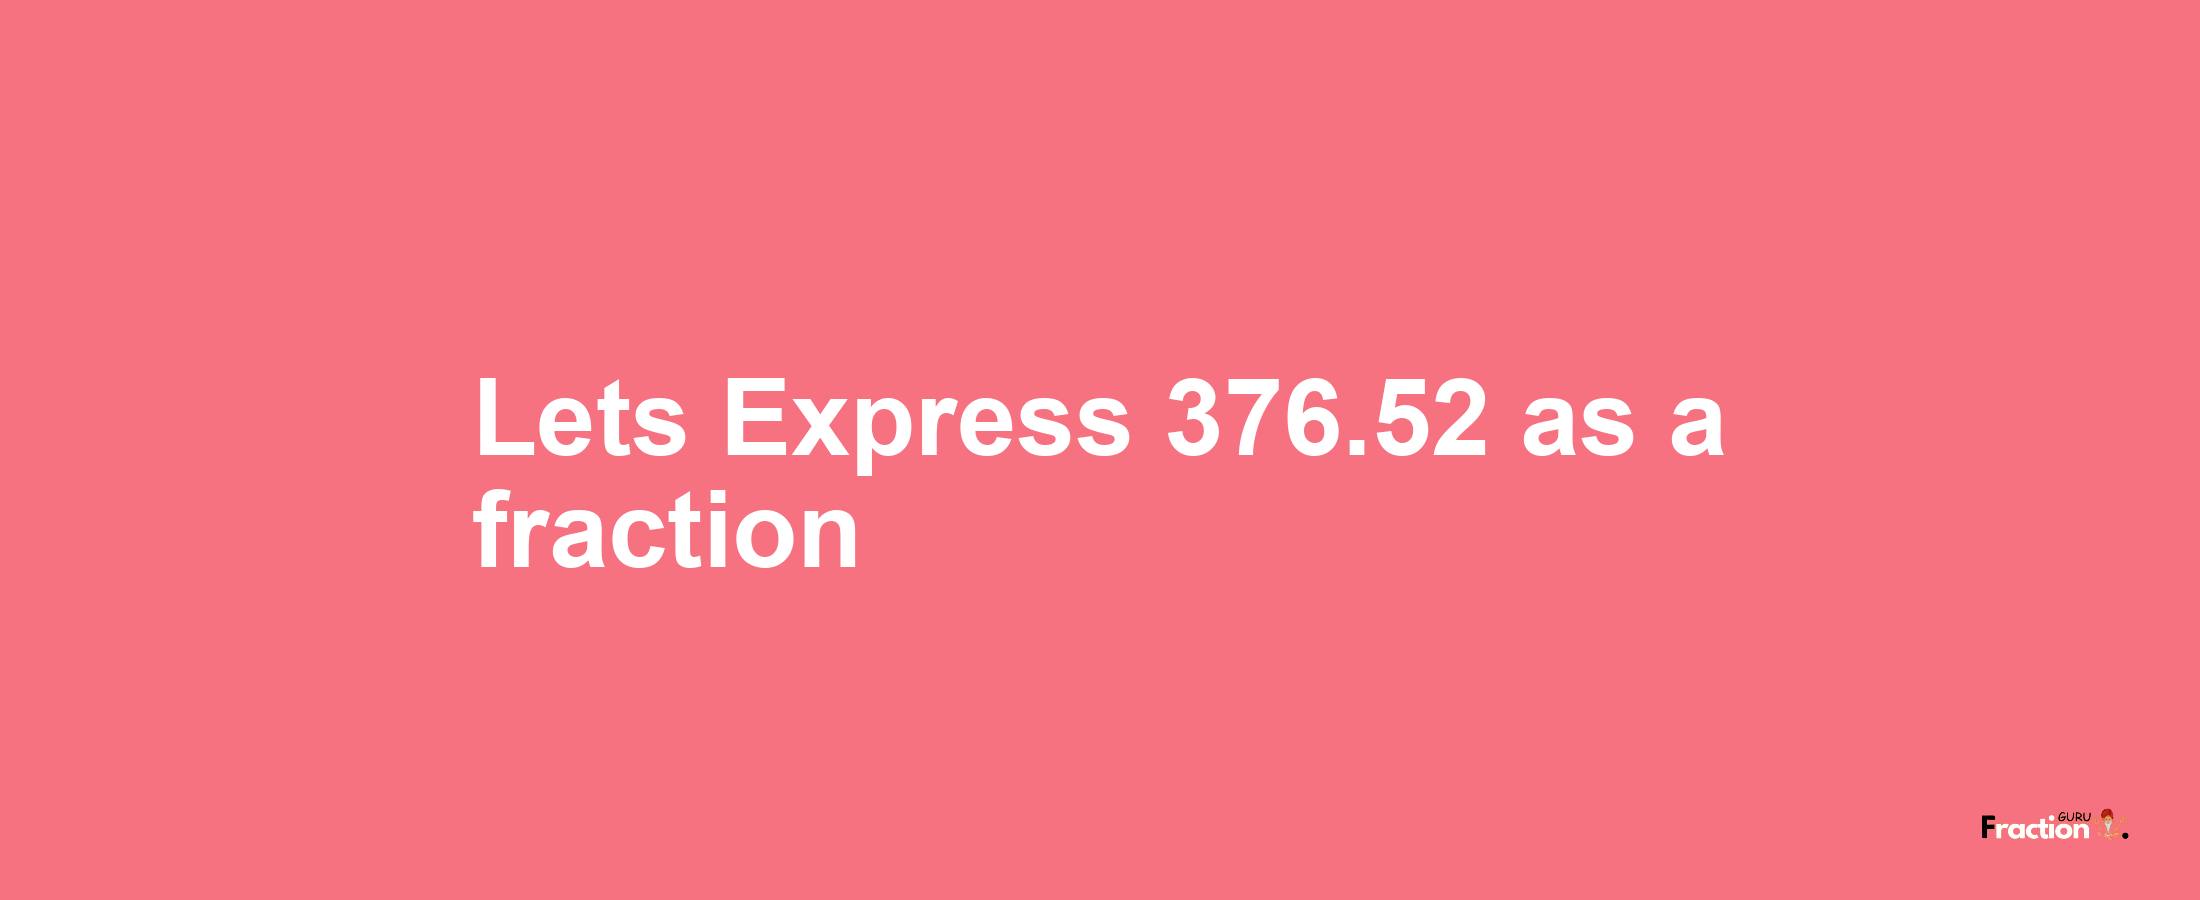 Lets Express 376.52 as afraction